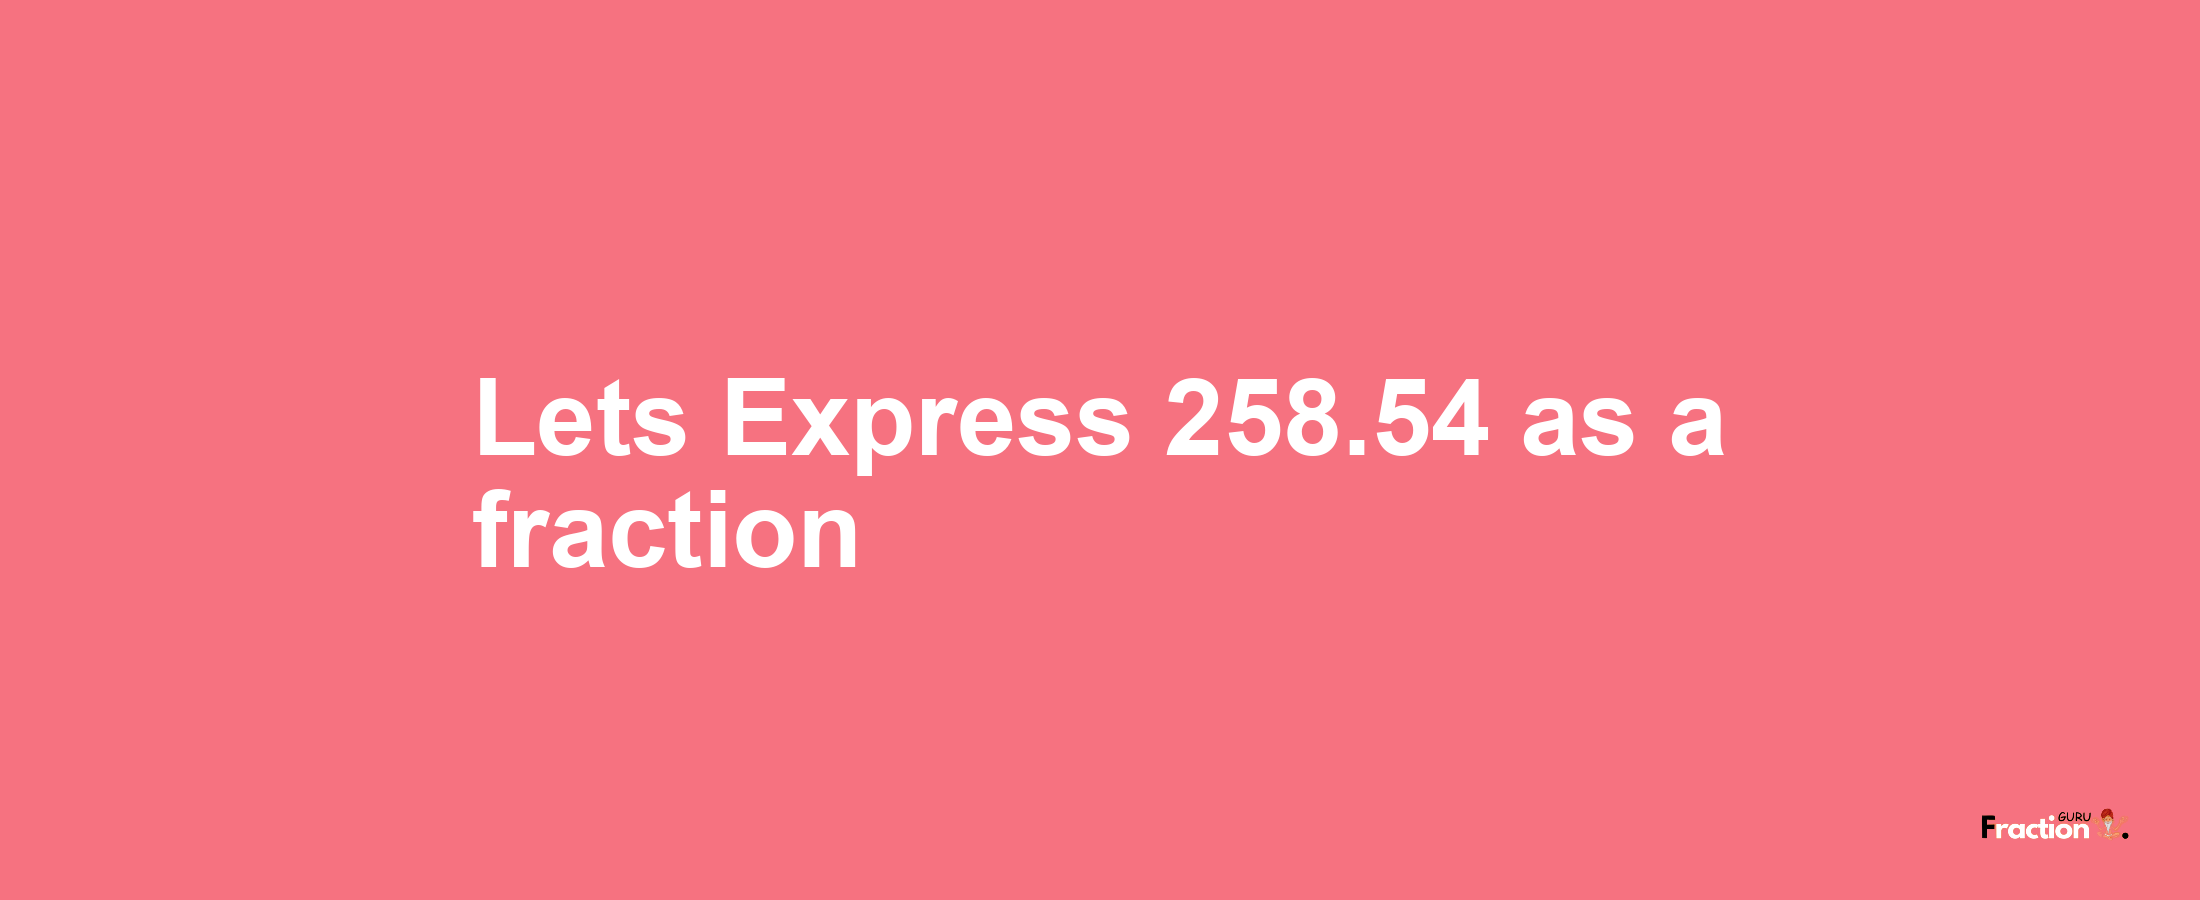 Lets Express 258.54 as afraction